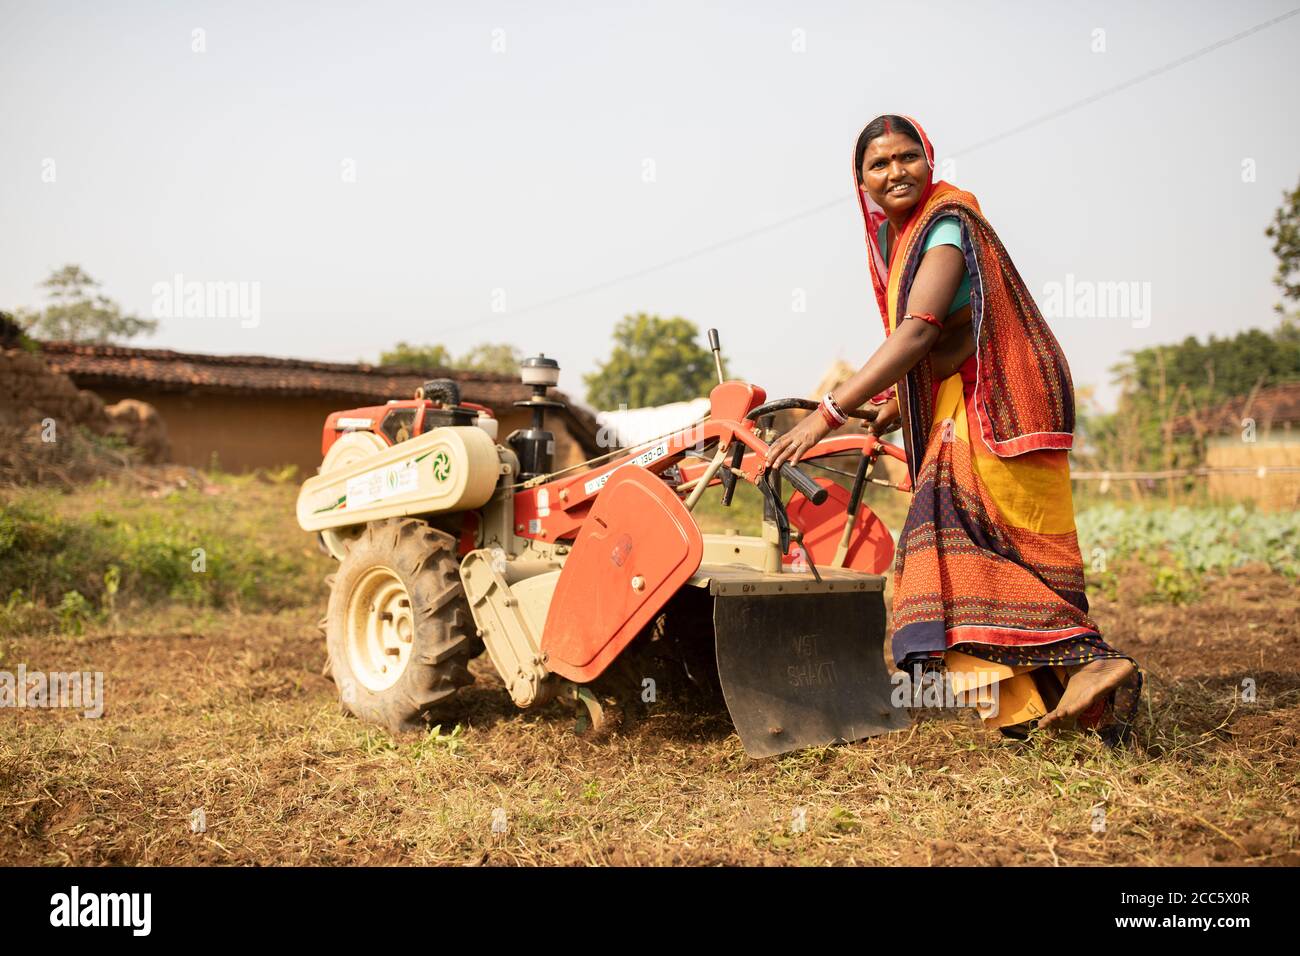 Nirmala Devi (32) operates a soil tiller on her farm in Bihar India. Women like Nirmala have been empowered and their livelihoods have been strengthened through Partnership Bihar, a Lutheran World Relief initiative that brings better farming techniques, high-quality seeds, improved nutrition for families, and microfinance self-help groups to communities in one of India’s poorest states. Stock Photo